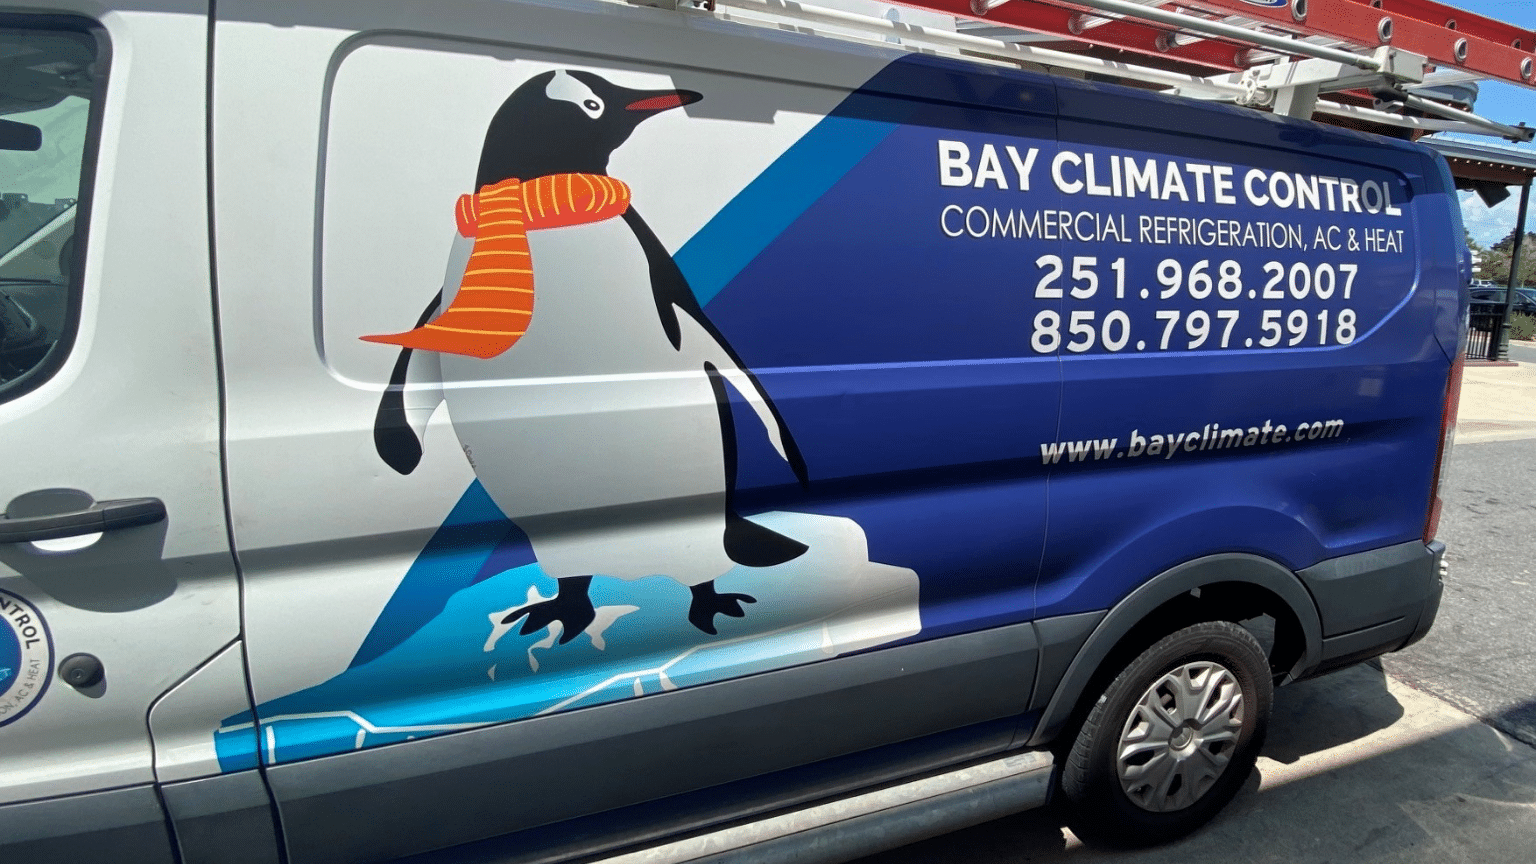 4 Ways Bay Climate Control is Improving Operations and Customer Service with ClearPathGPS